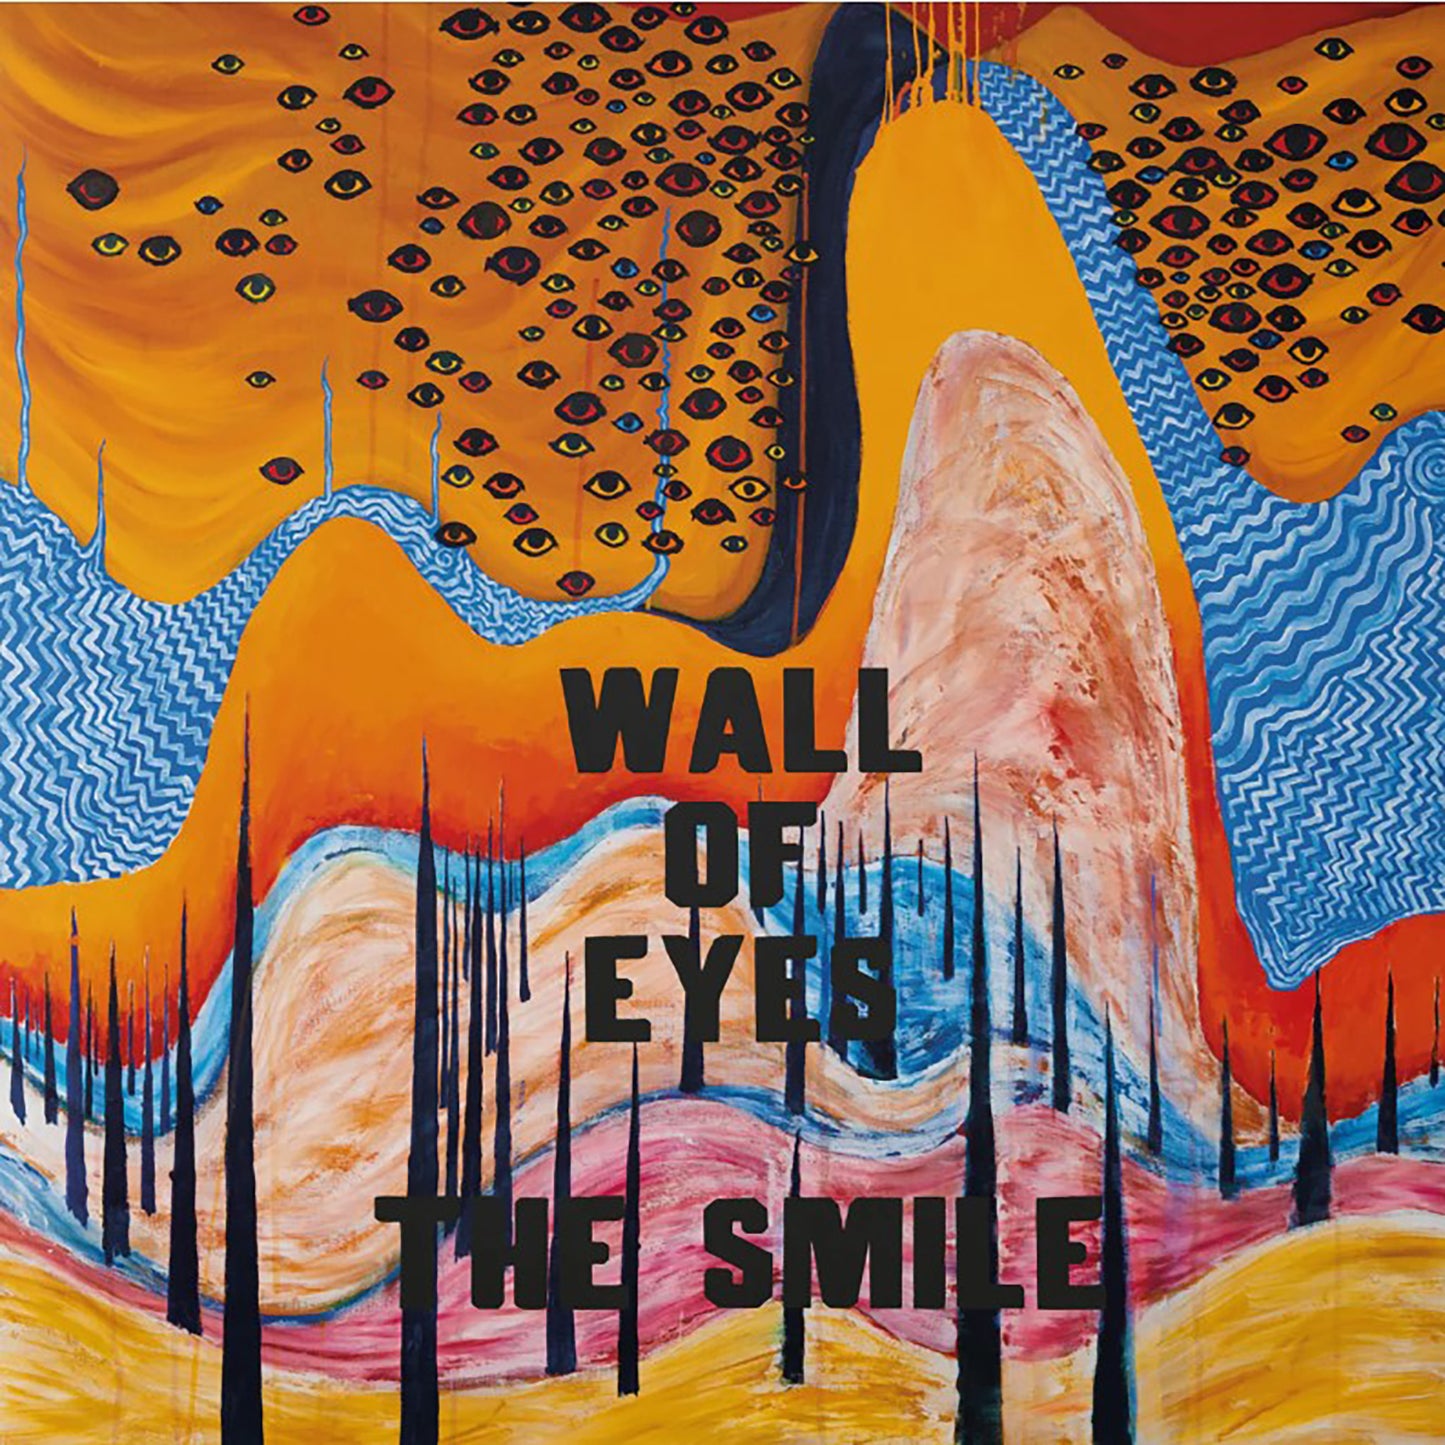 The Smile - Wall Of Eyes